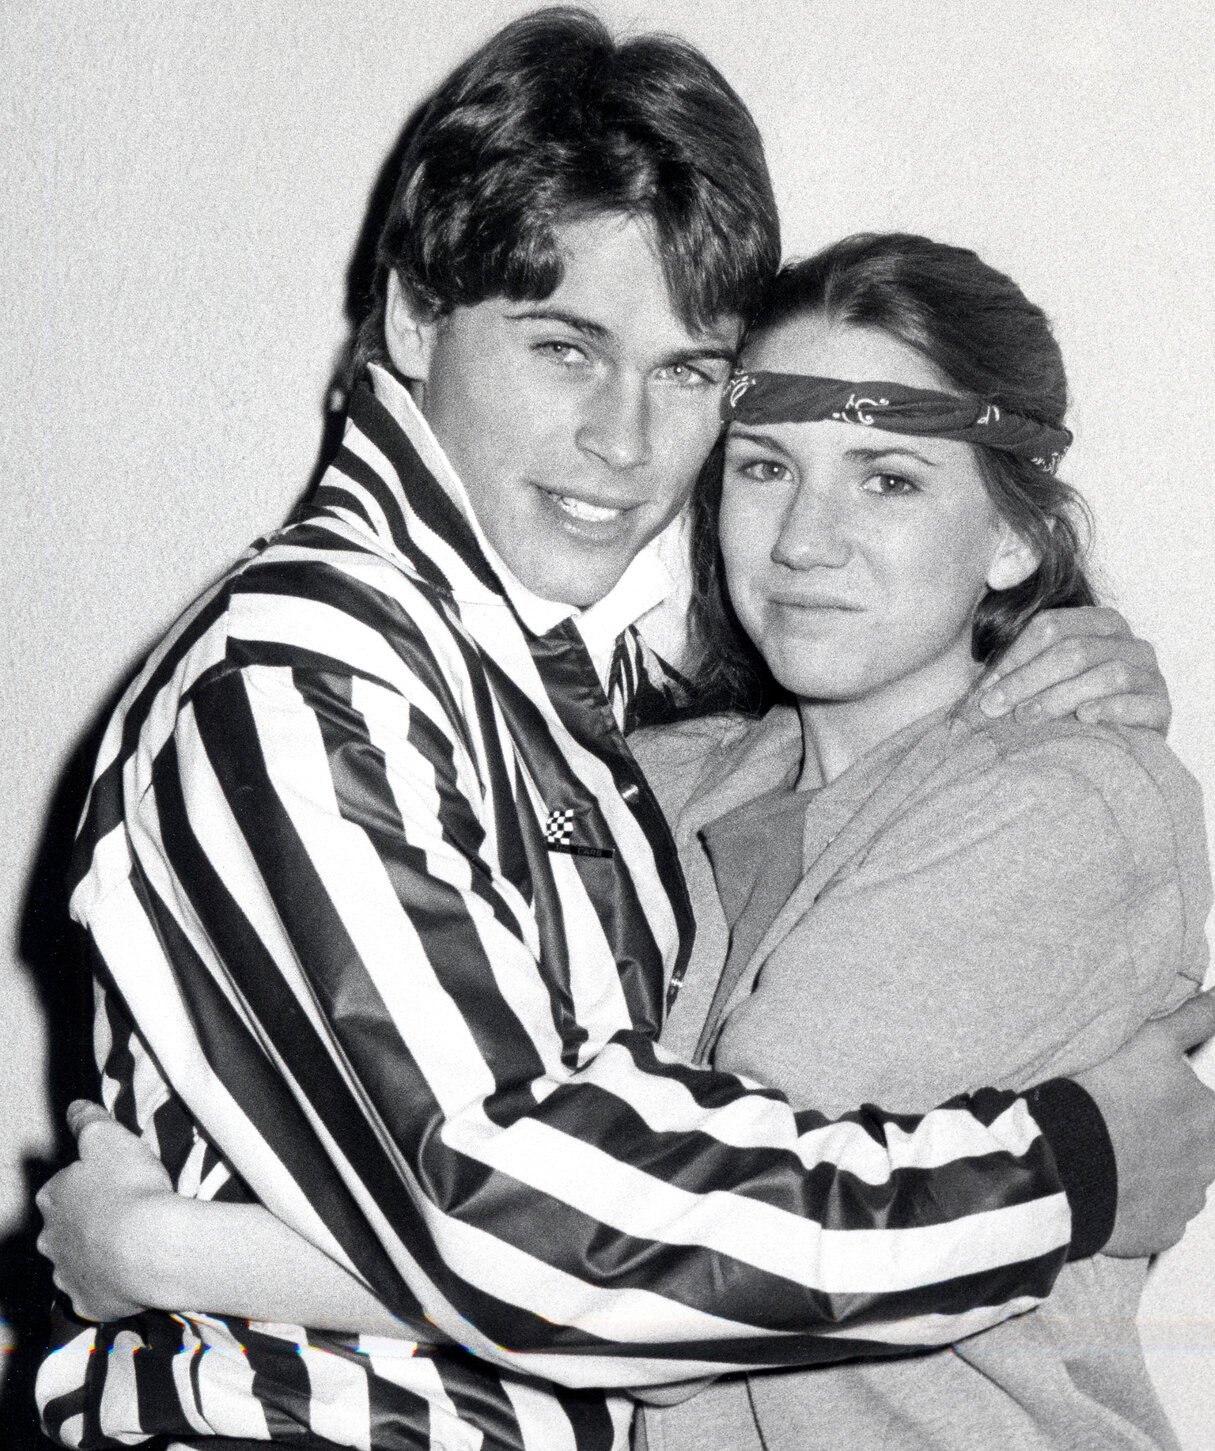 Rob Lowe and Melissa Gilbert embrace in black and white